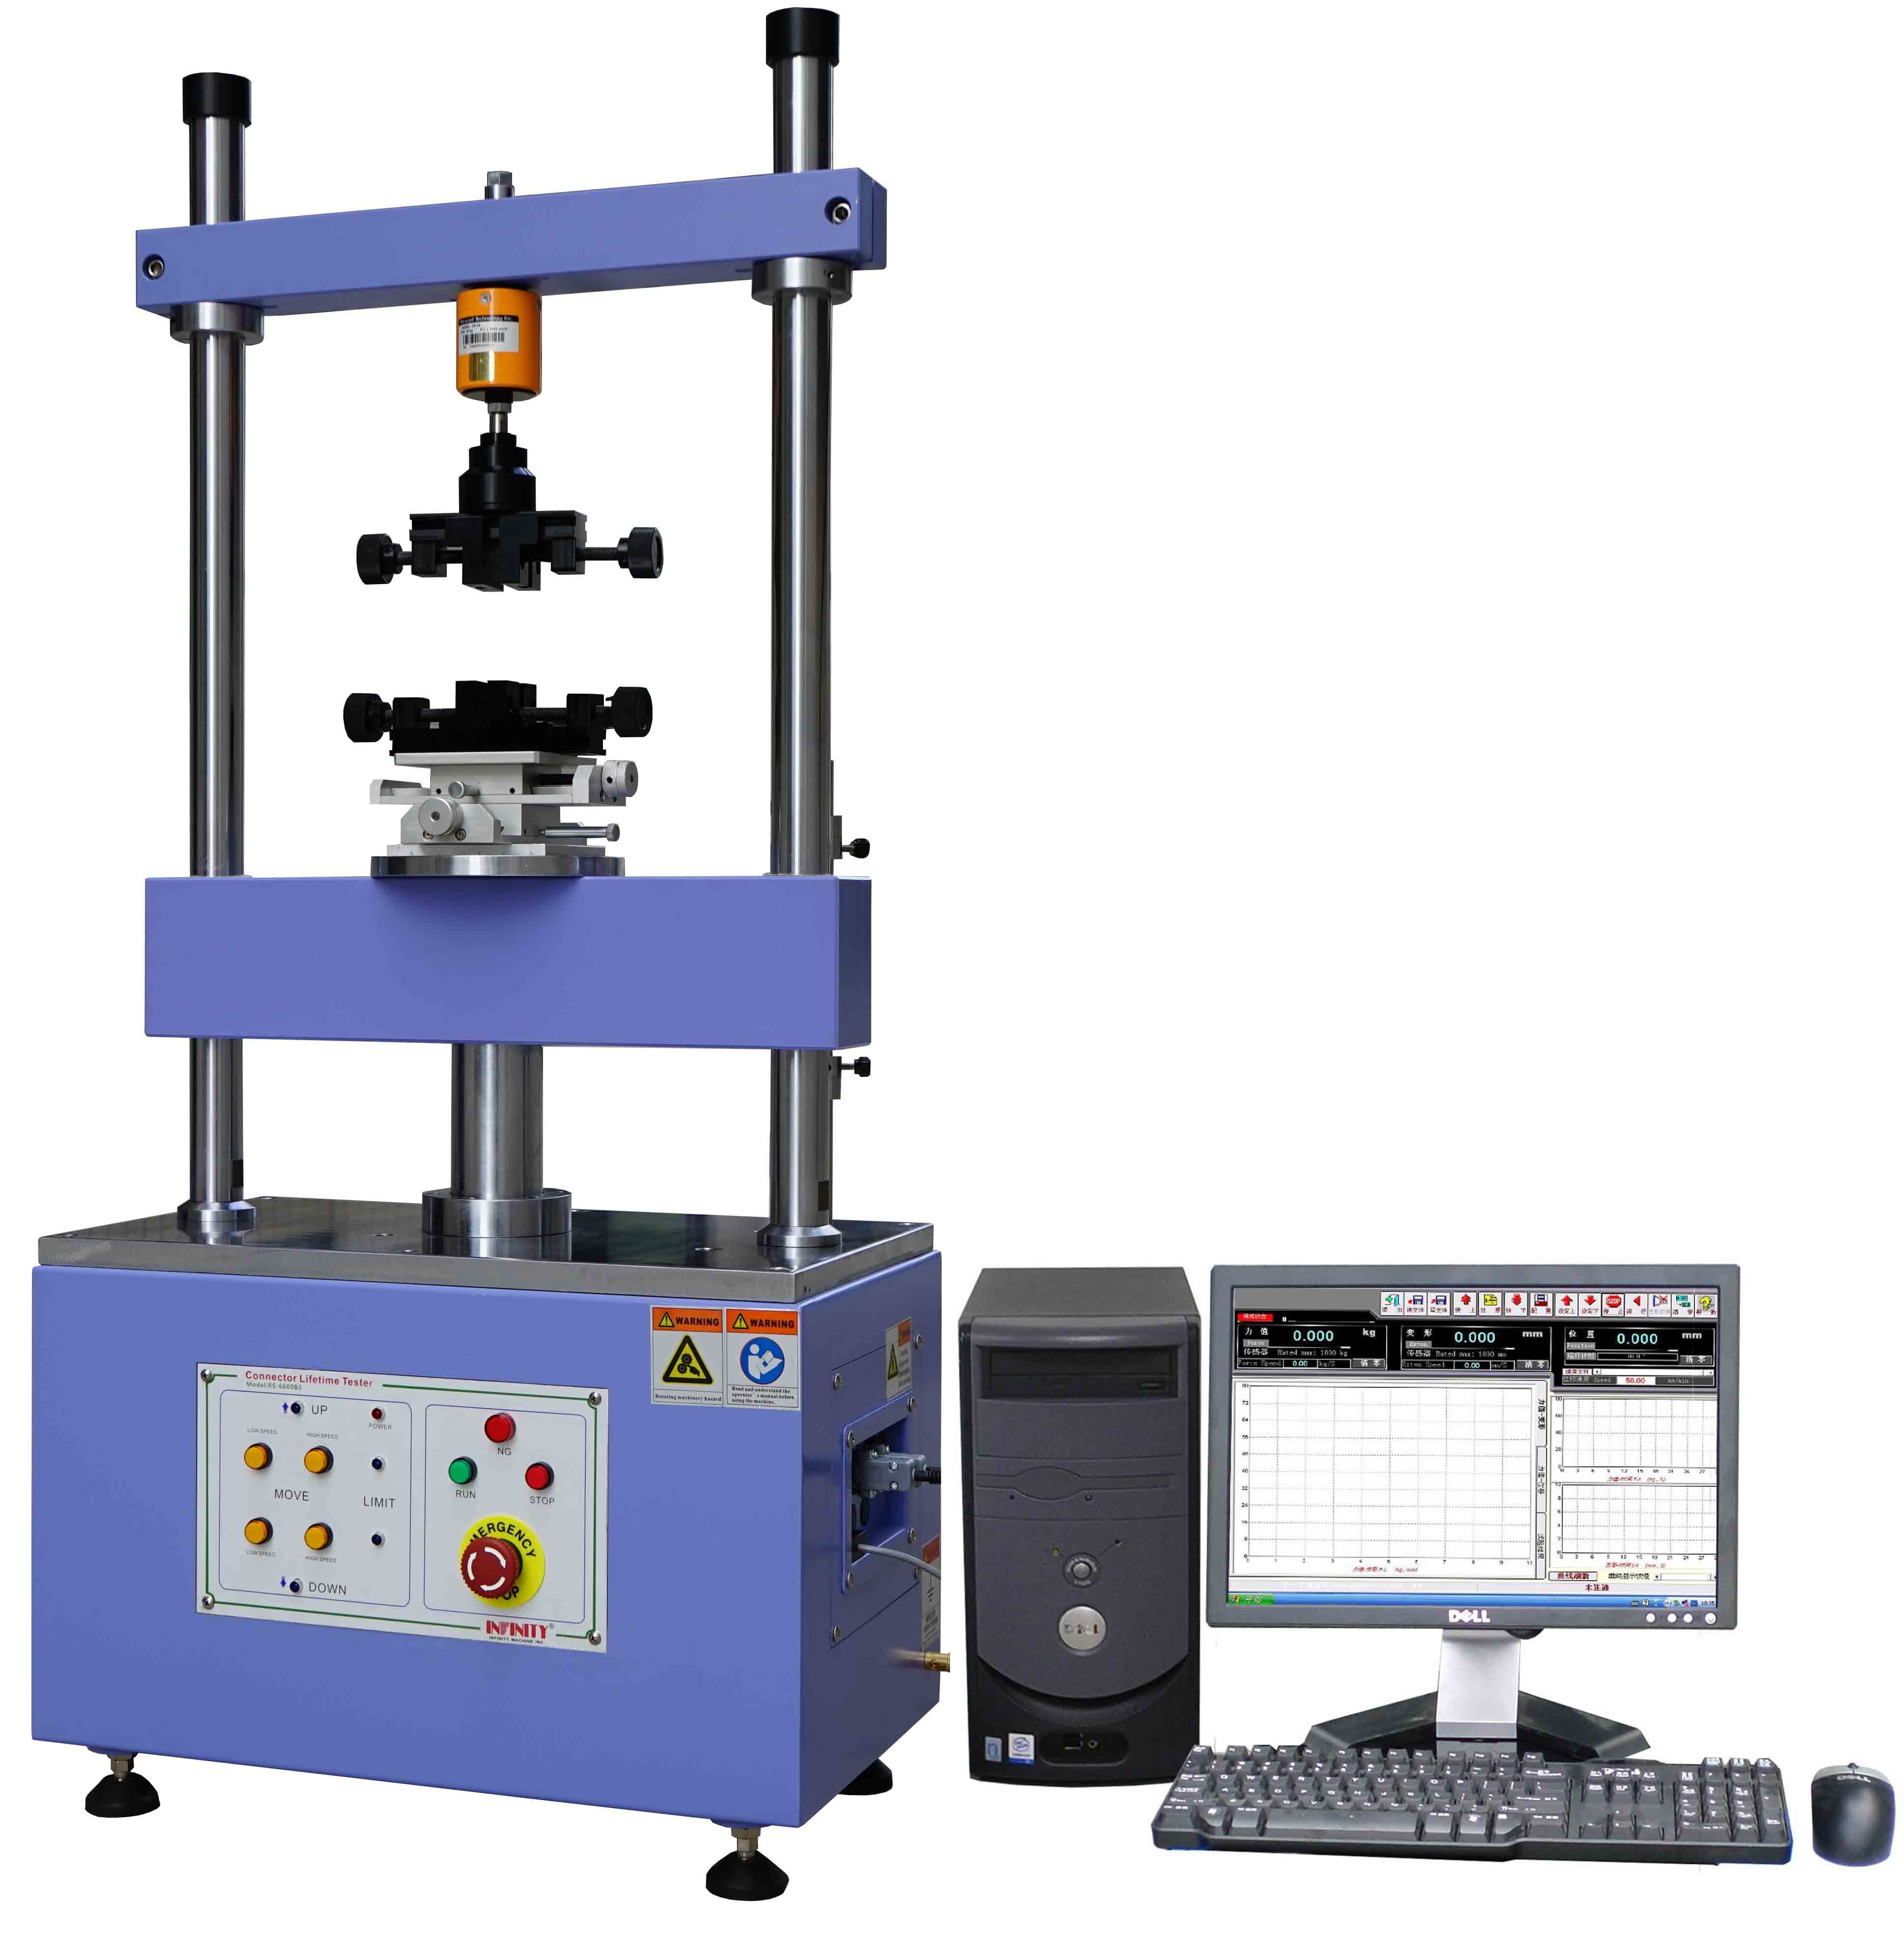 Servo Control Electronic Product Tester for Inserting / Extracting Test